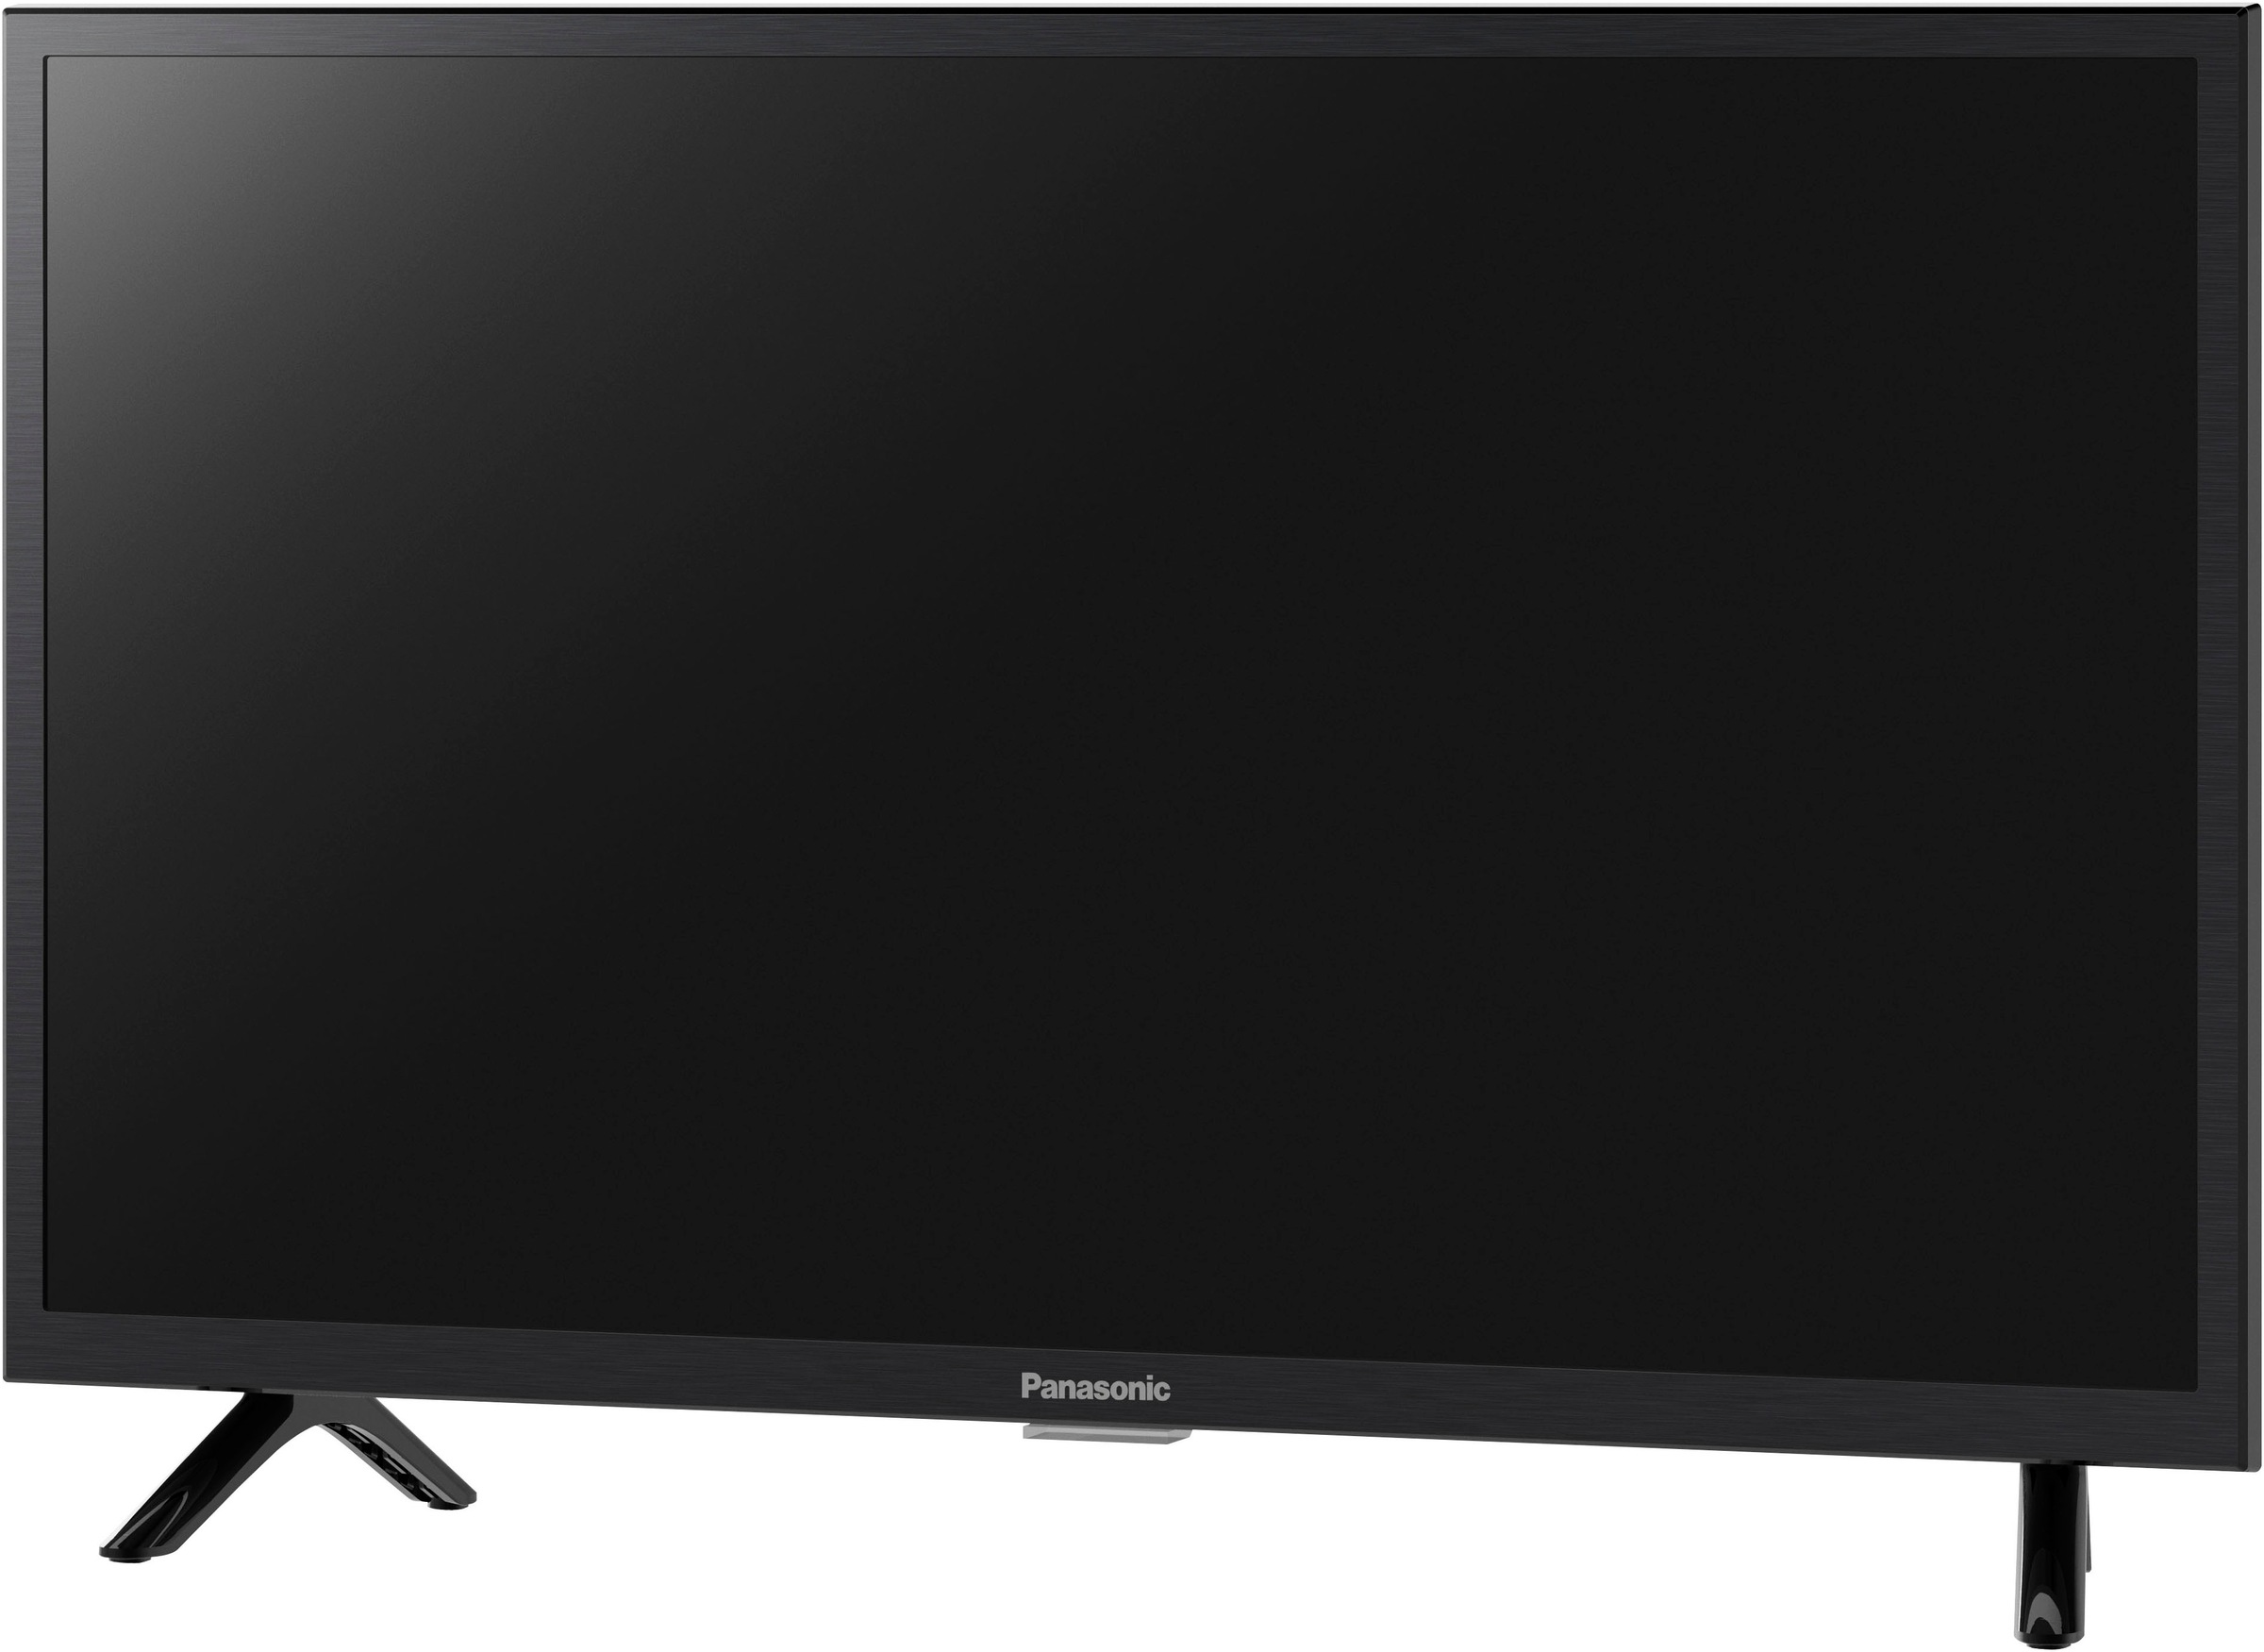 Panasonic LED-Fernseher »TX-24MSW504«, 60 cm/24 Zoll, HD, Android TV-Smart-TV